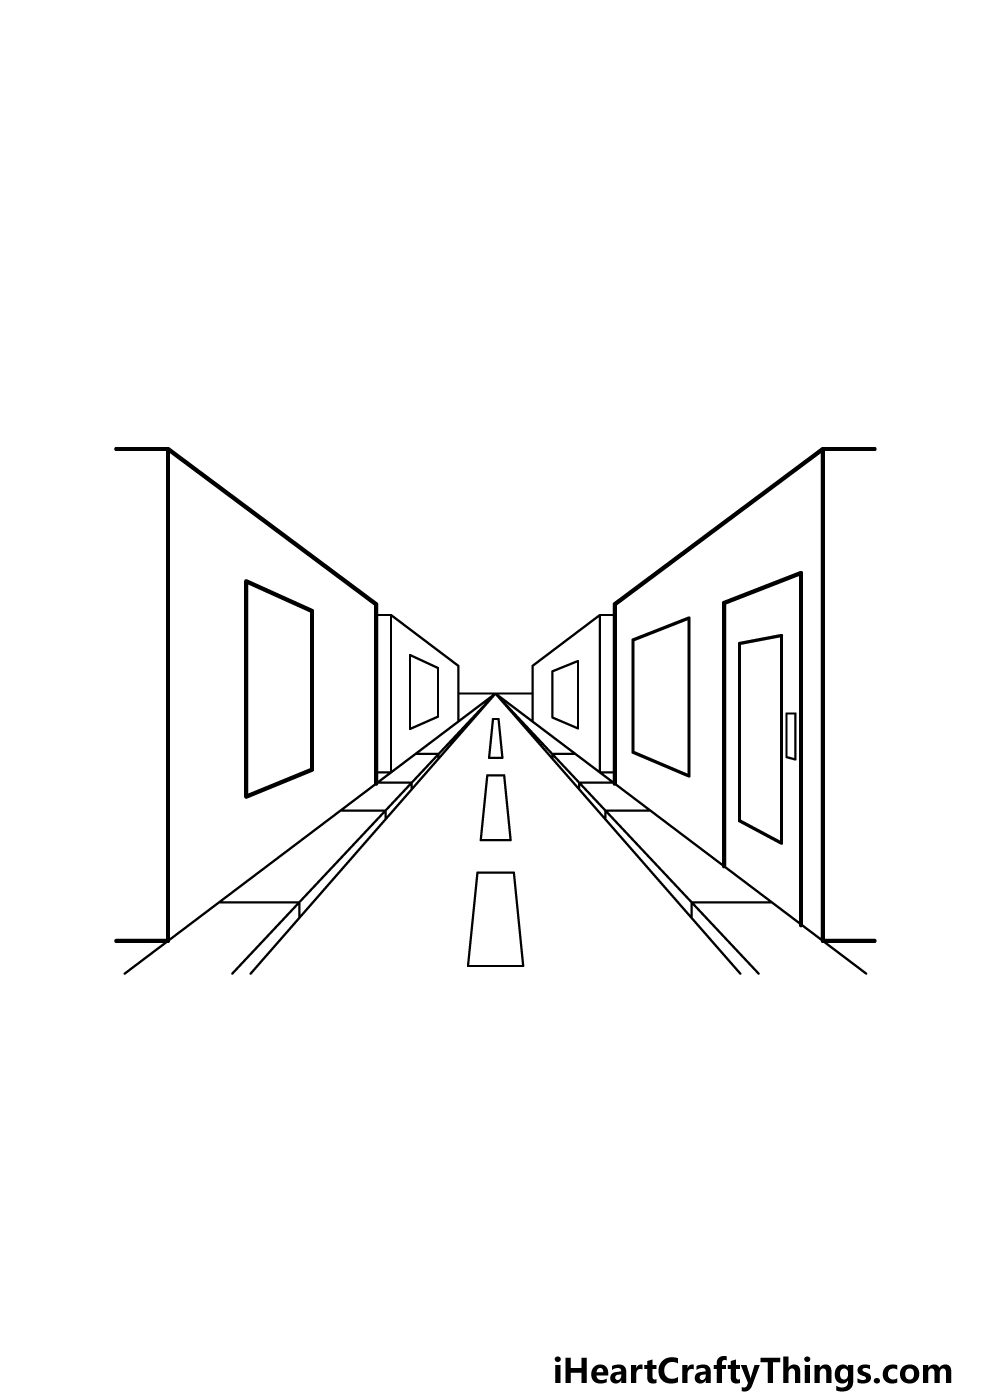 One-Point Perspective Drawing - How To Draw A One-Point Perspective Step By  Step